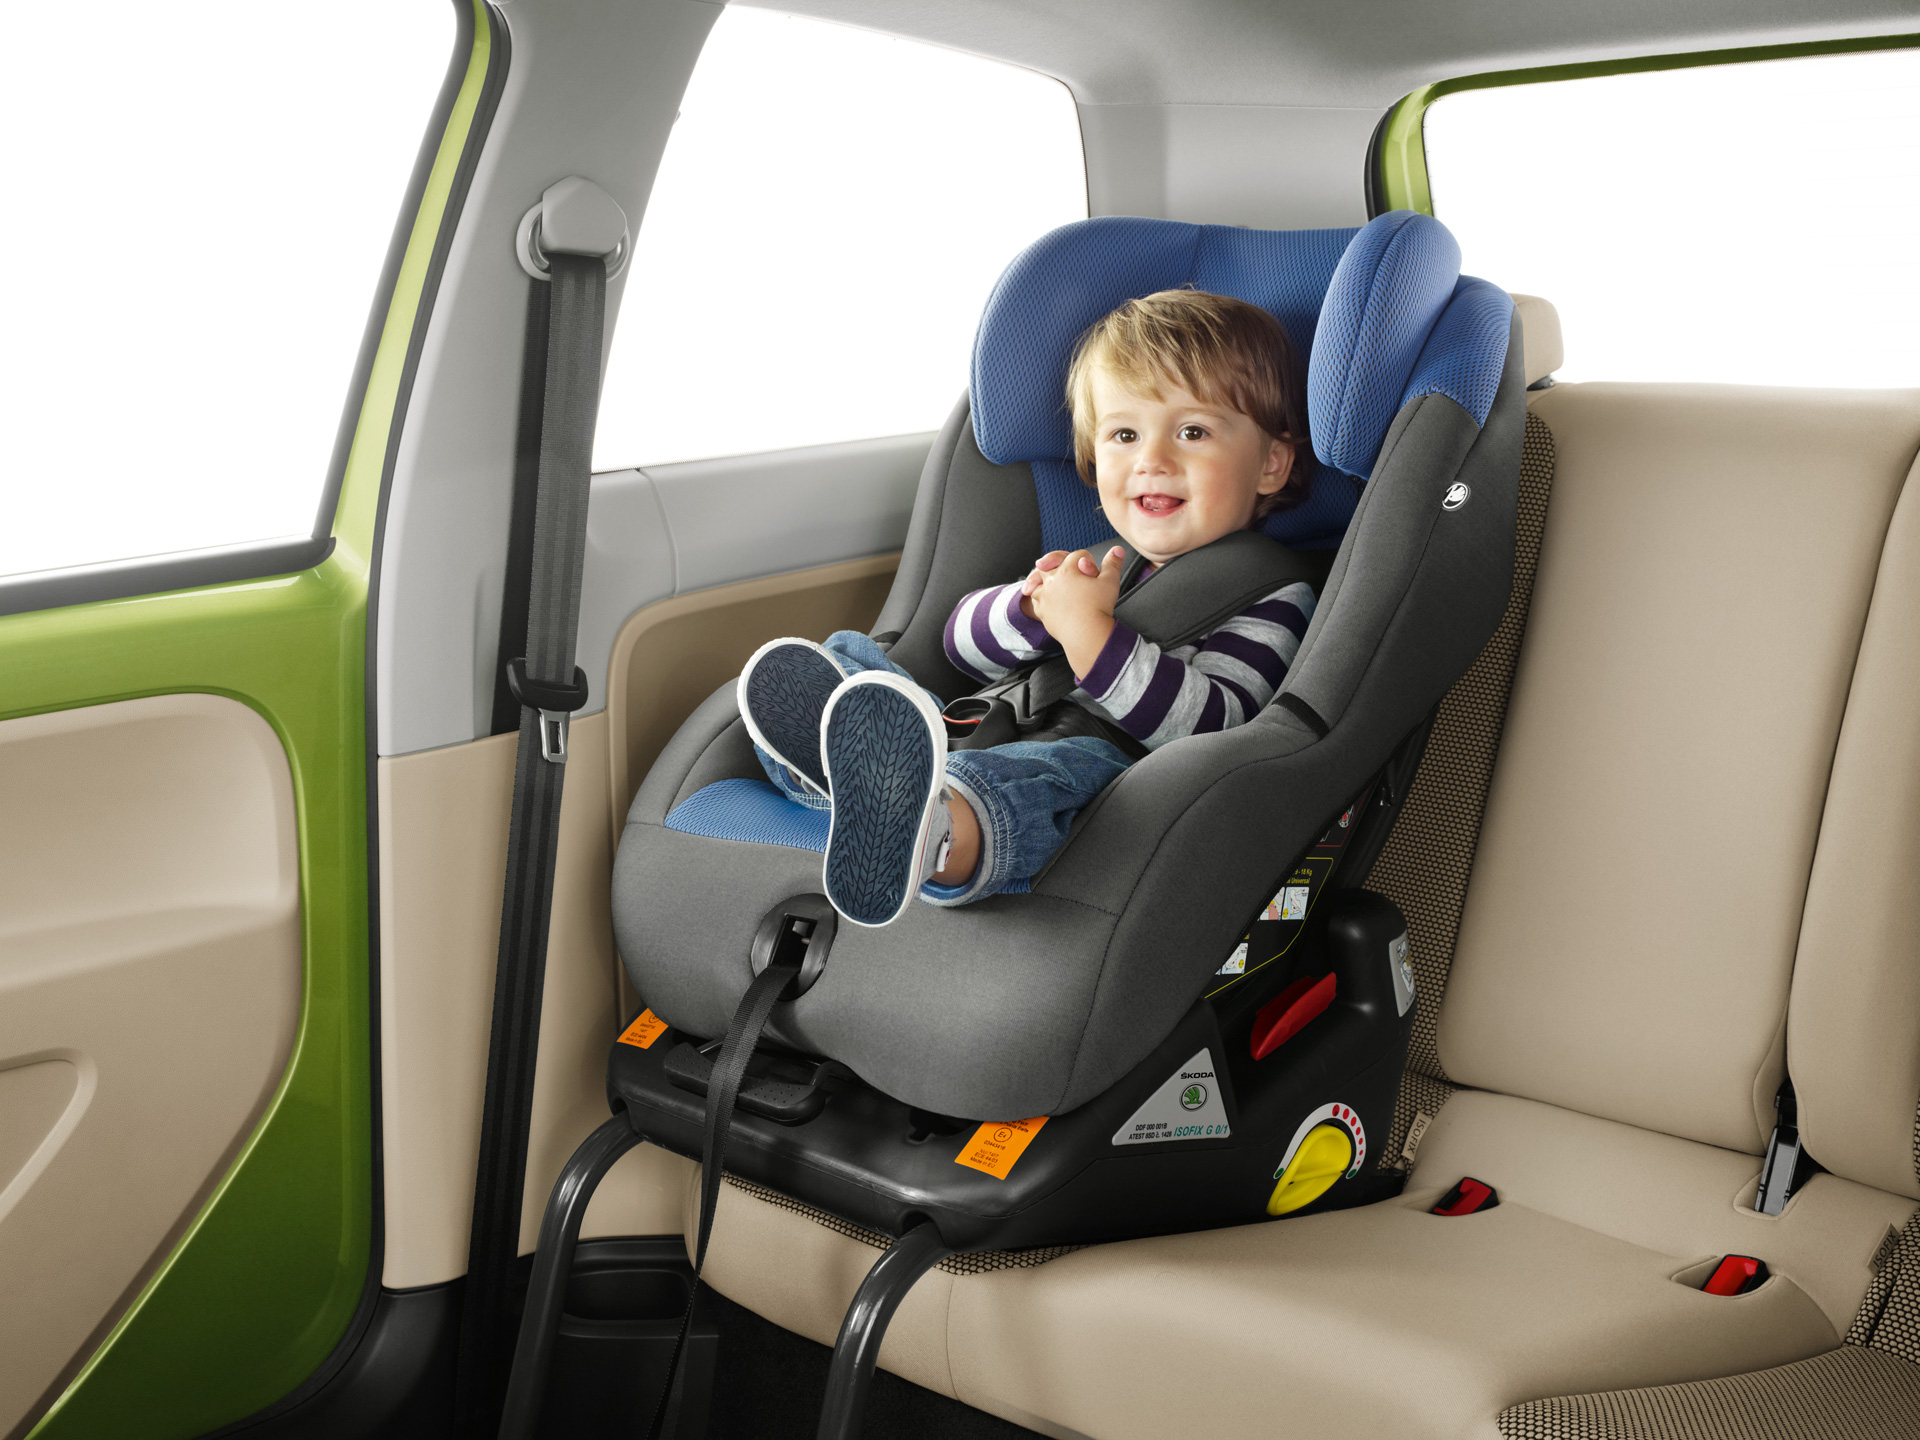 Isofix Car Seats, Which Car Seats Have Isofix